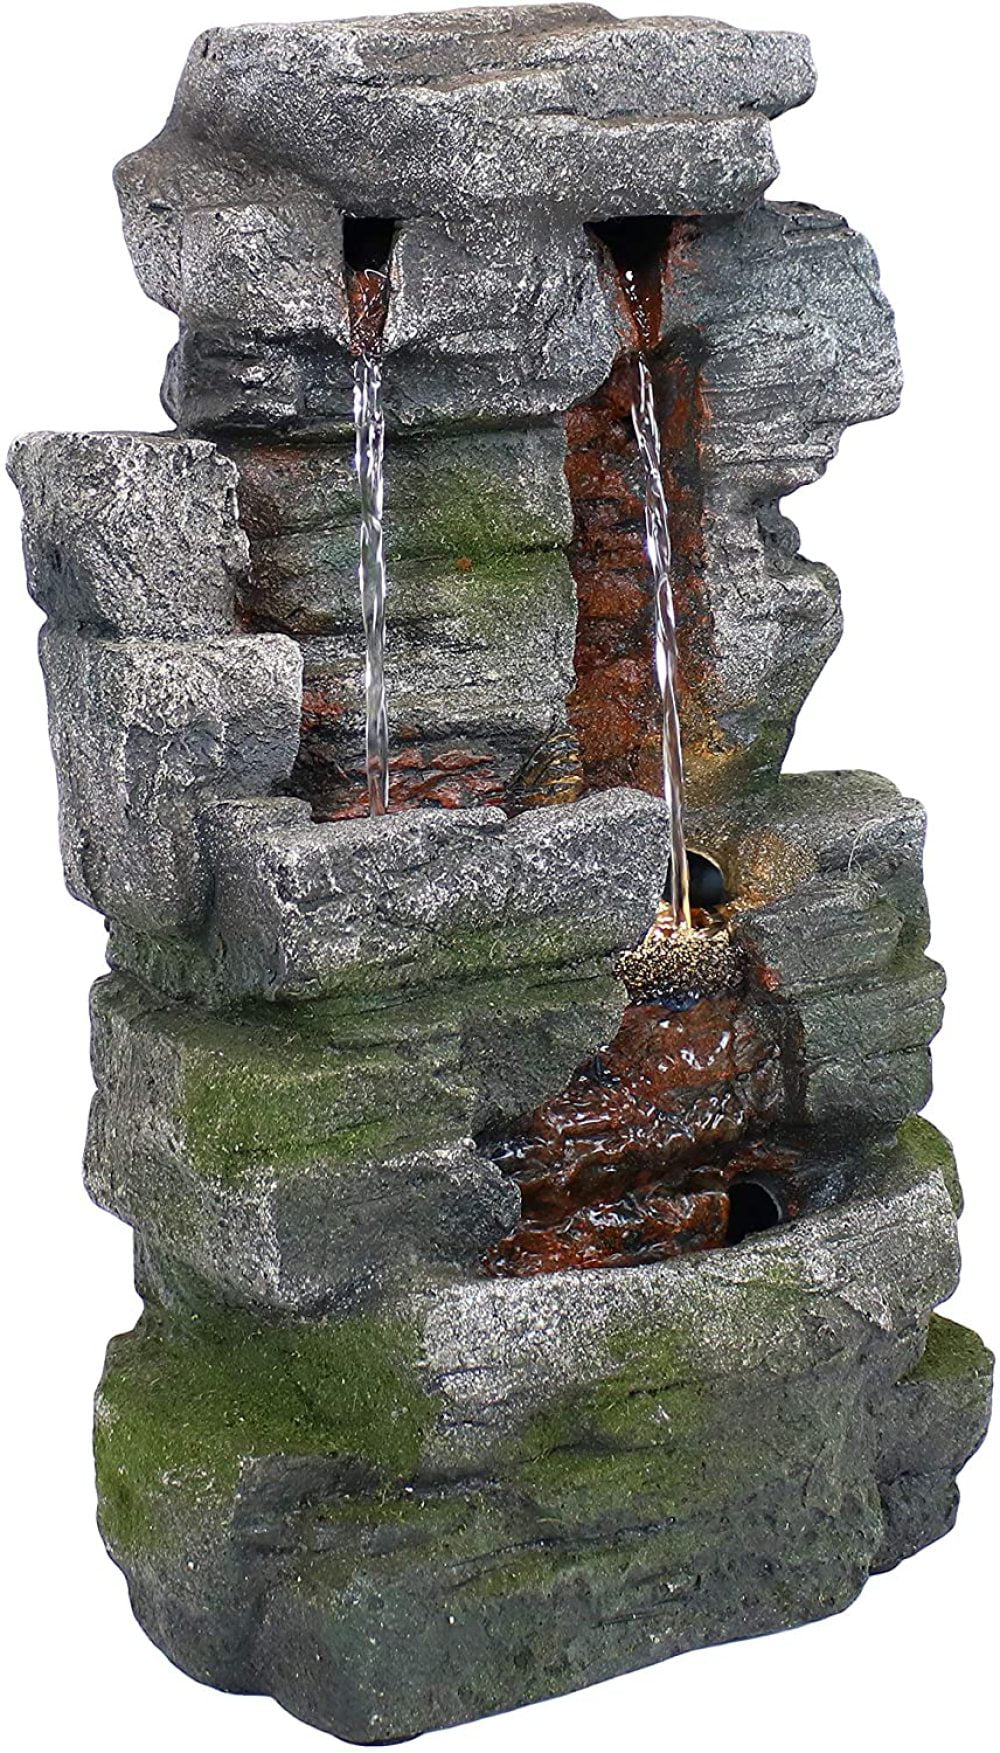 Sunnydaze Stony Rock Waterfall Indoor Tabletop Fountain 11-Inch Water Feature 